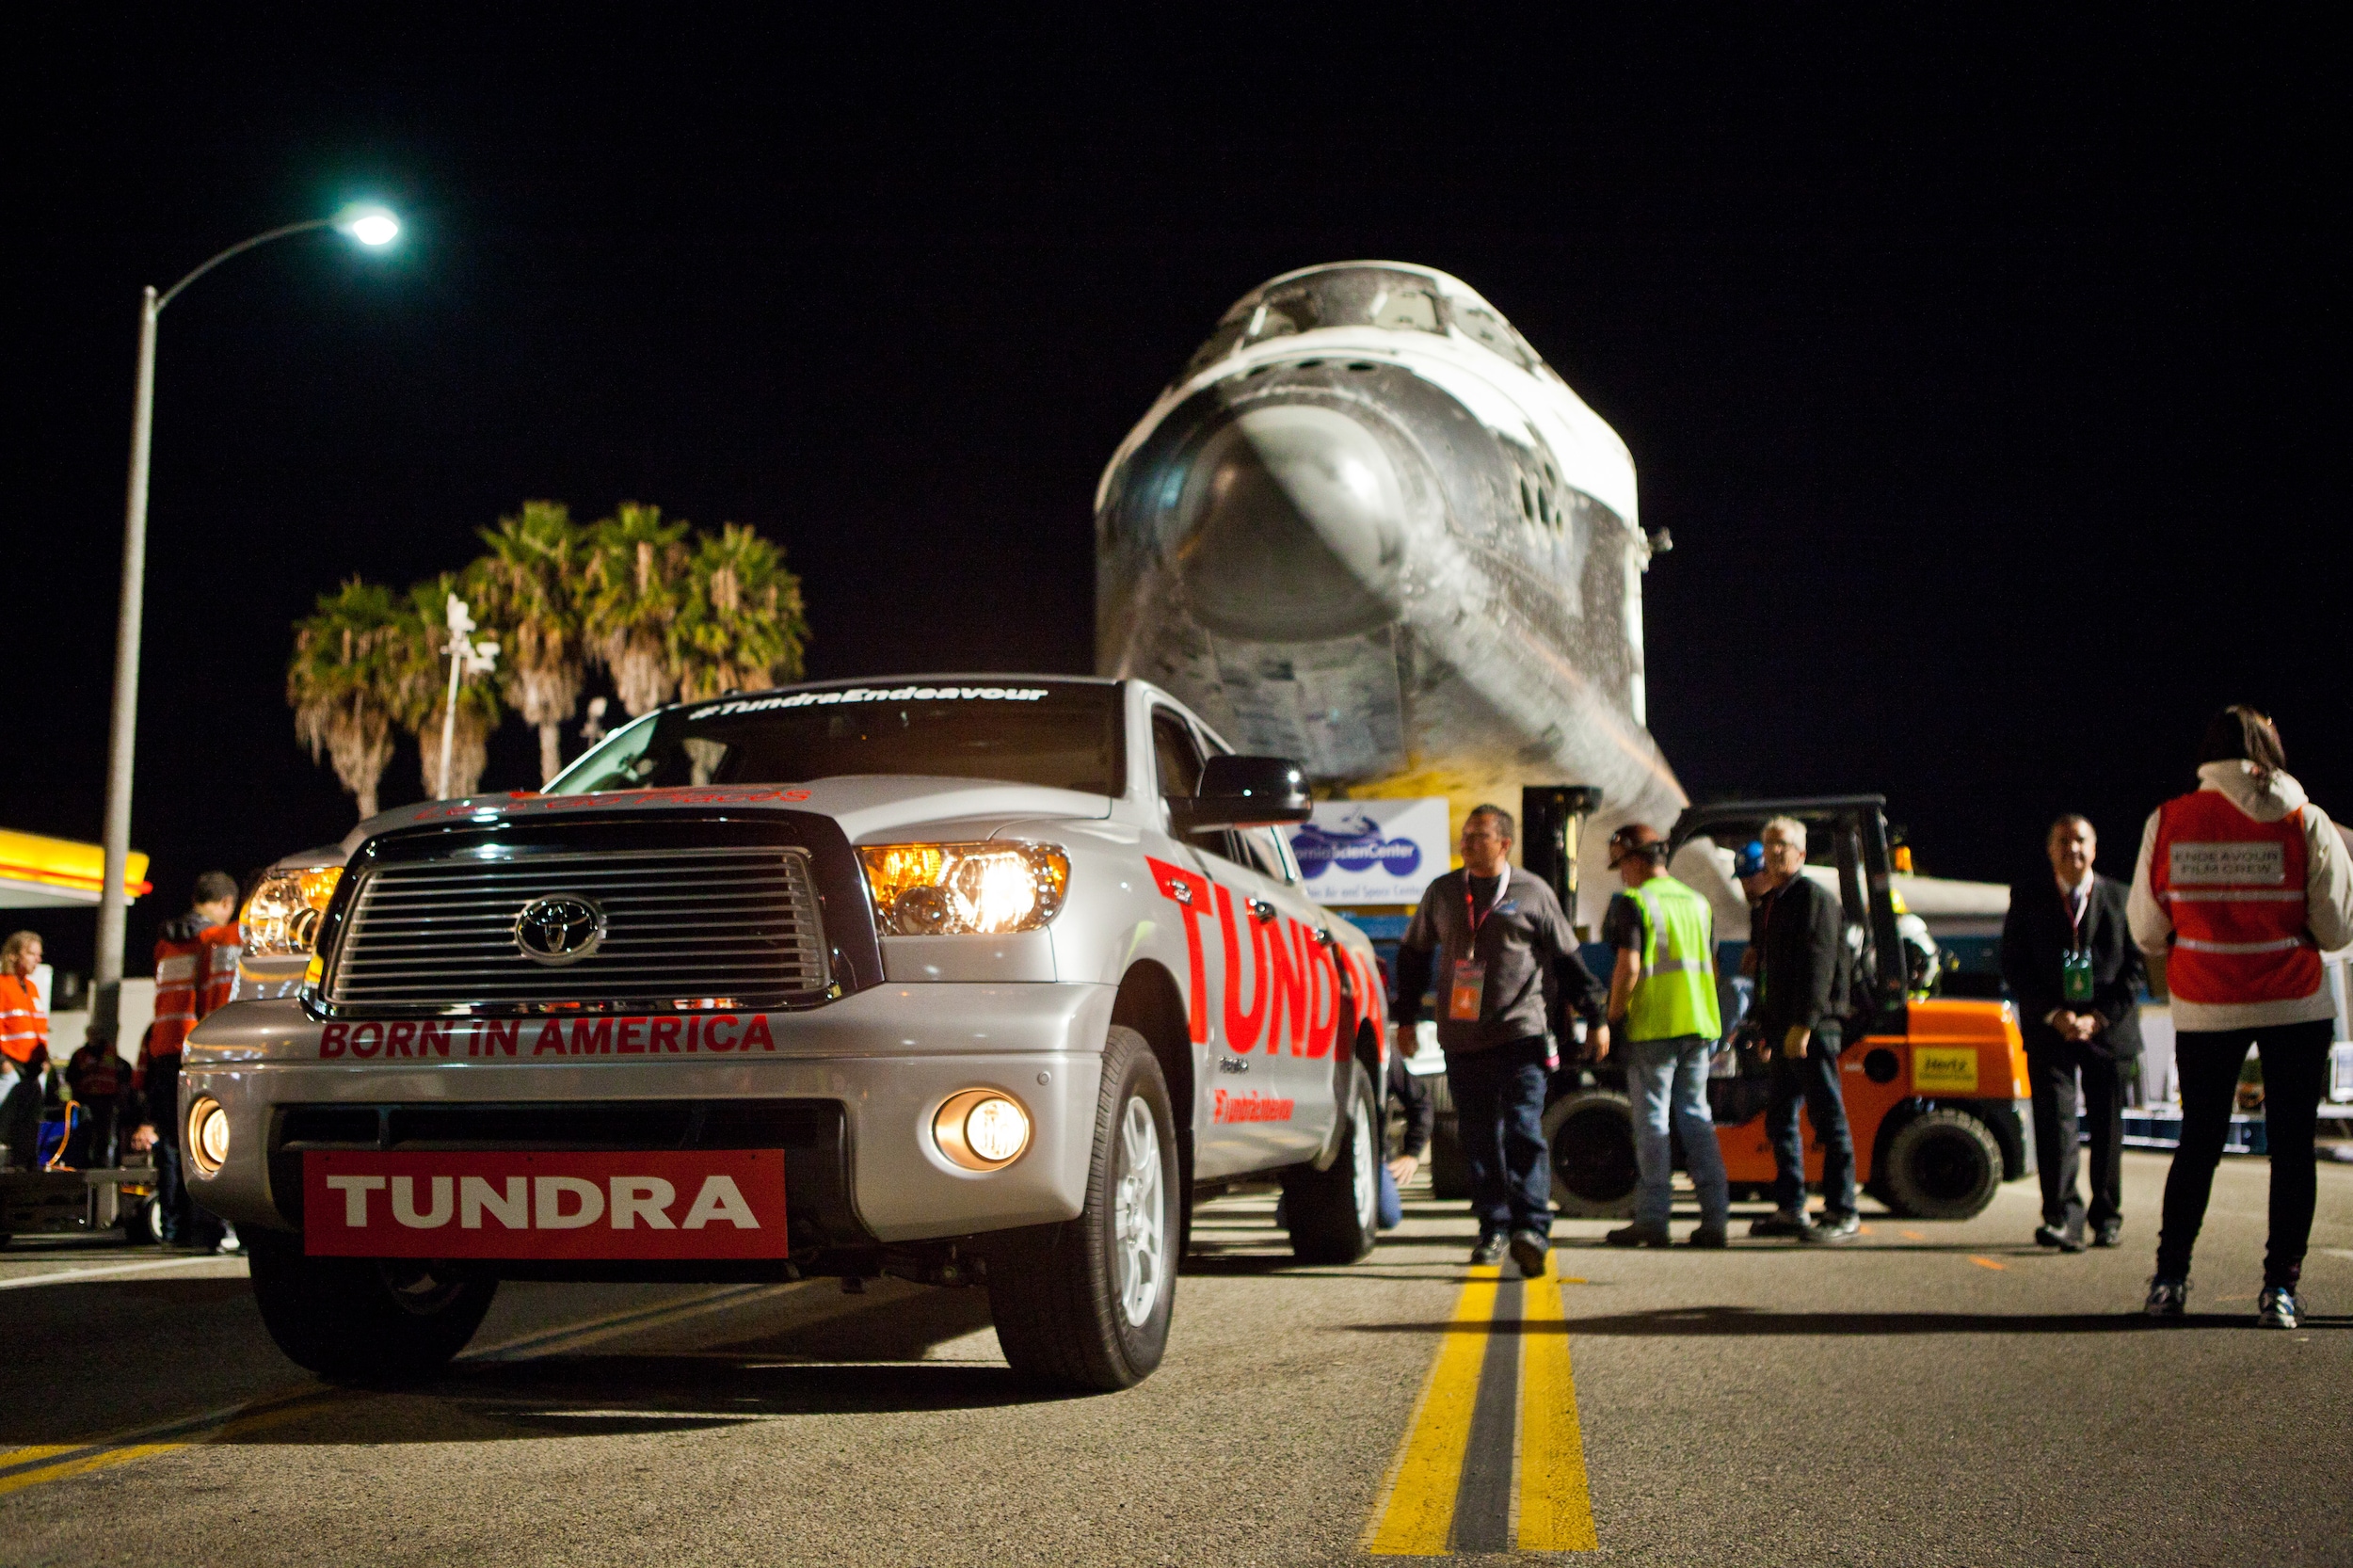 how did the toyota tundra tow the space shuttle #1